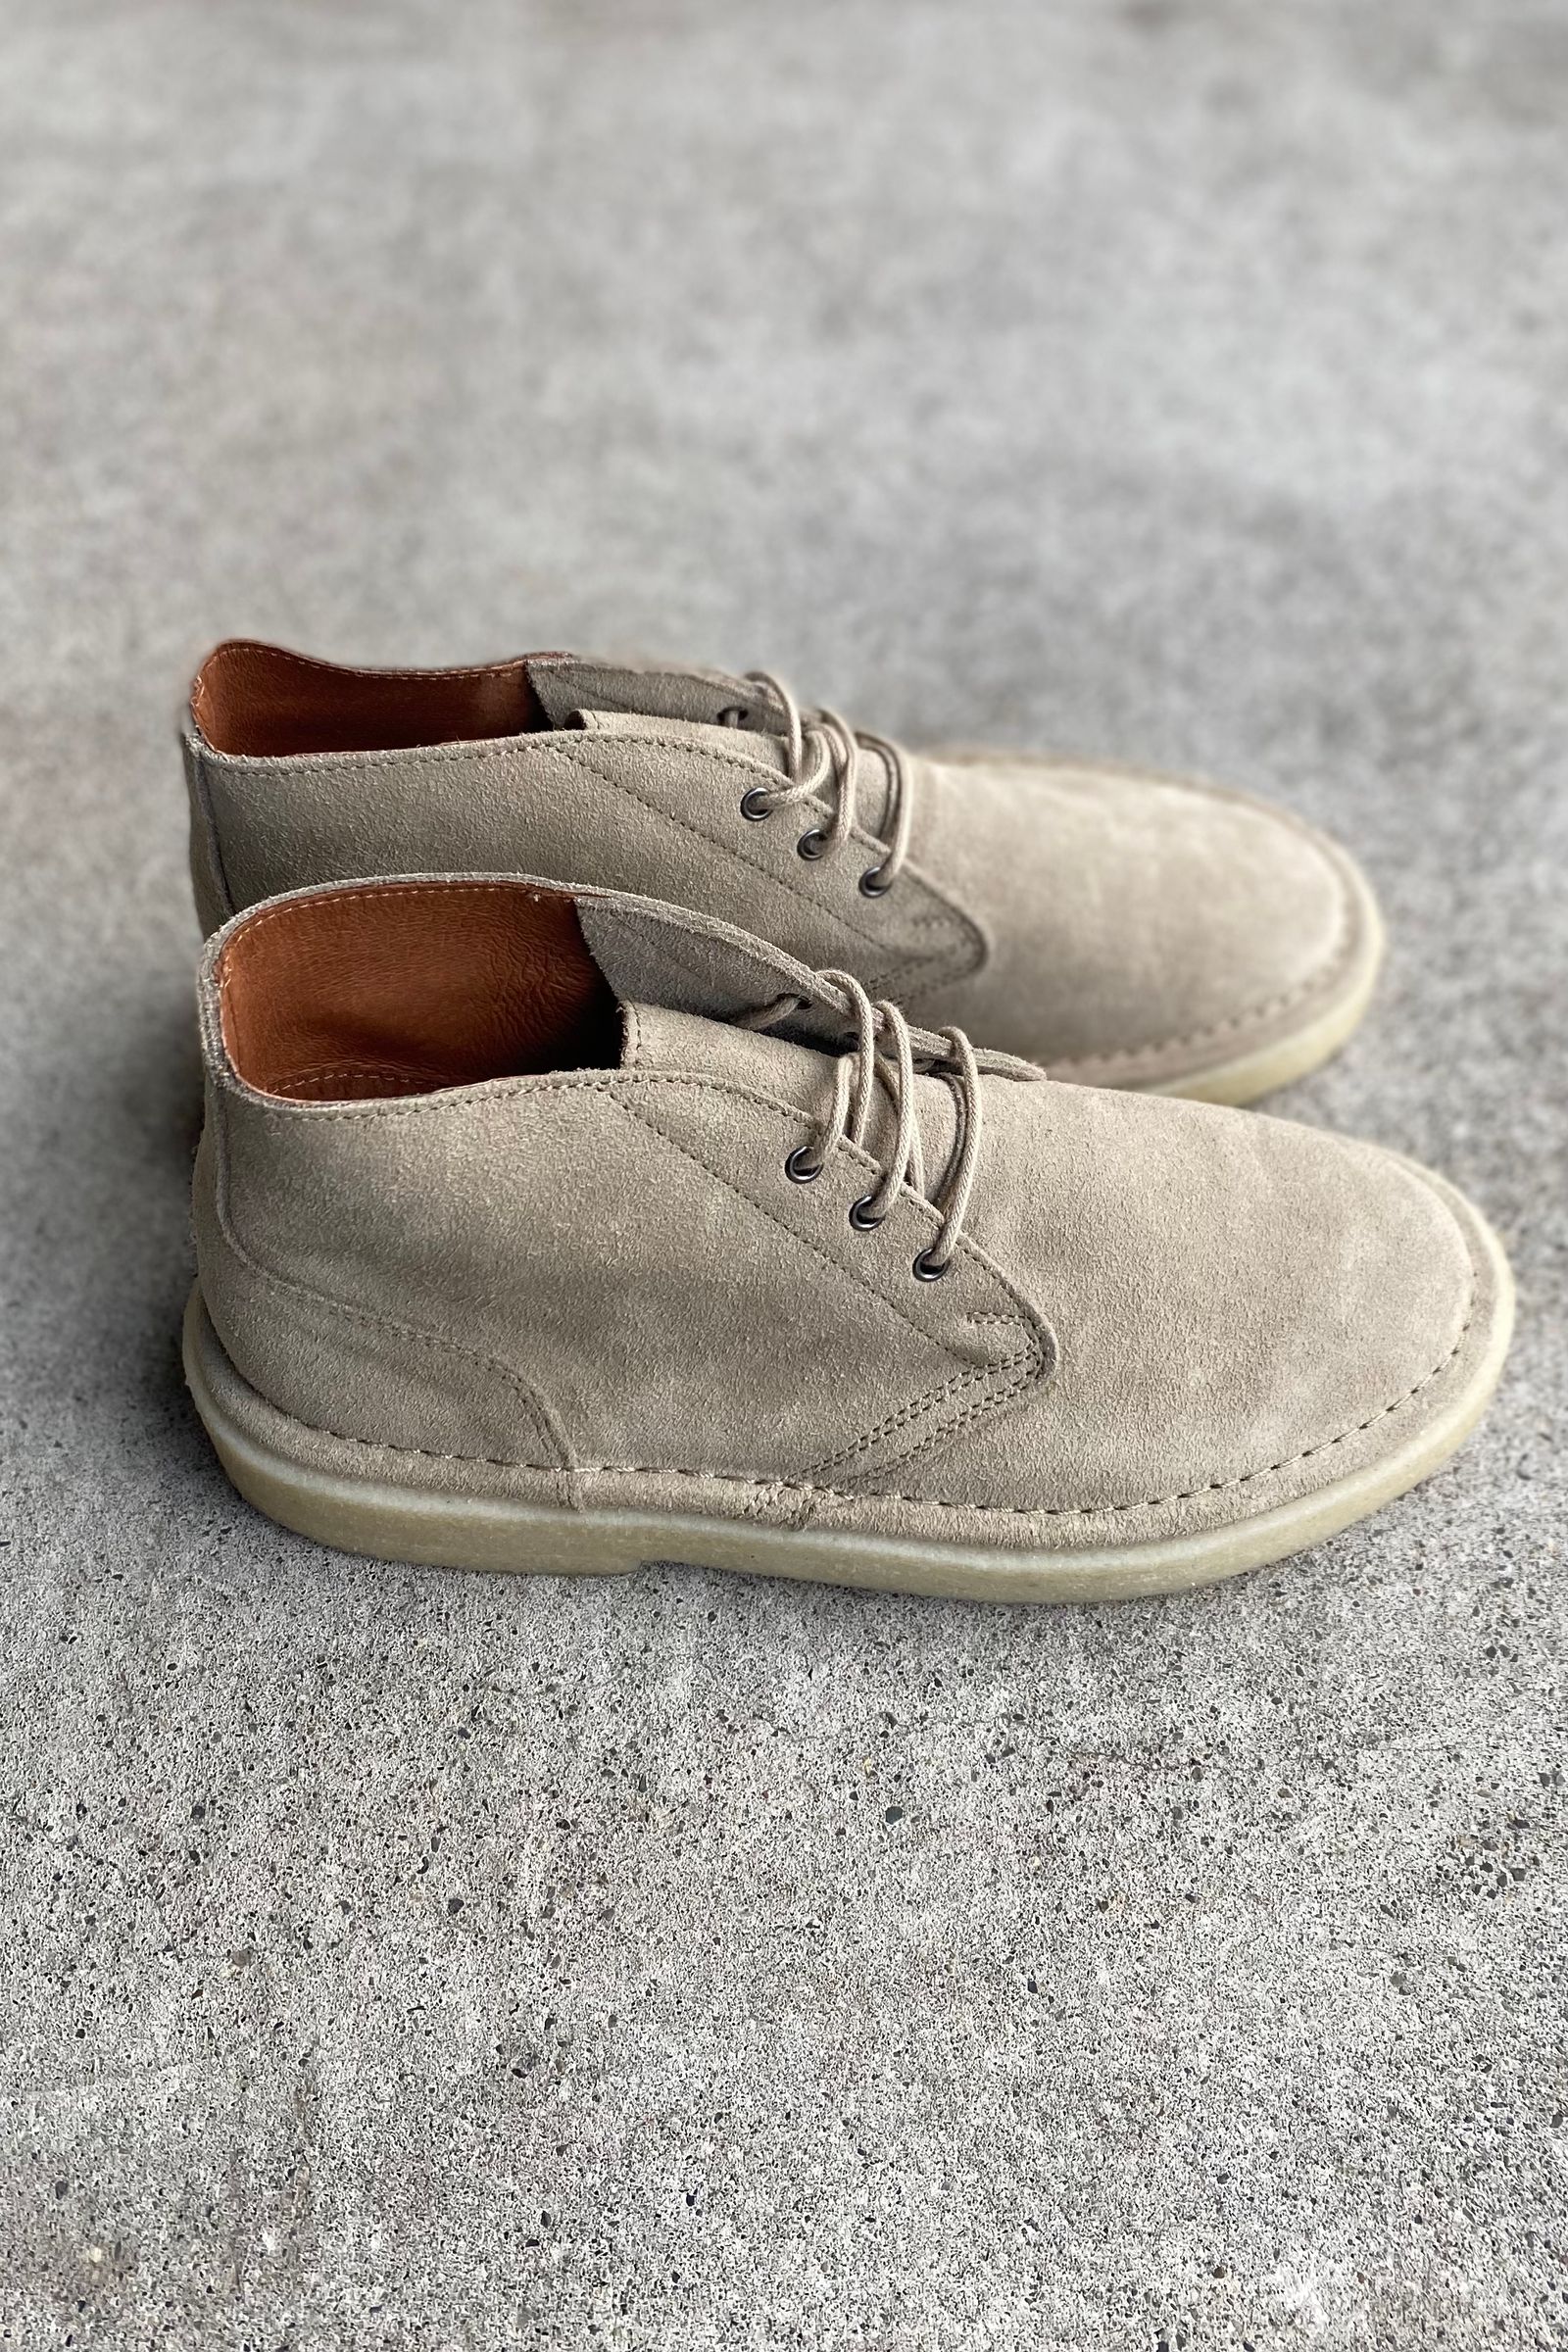 REPRODUCTION OF FOUND - us navy military chukka 799scr